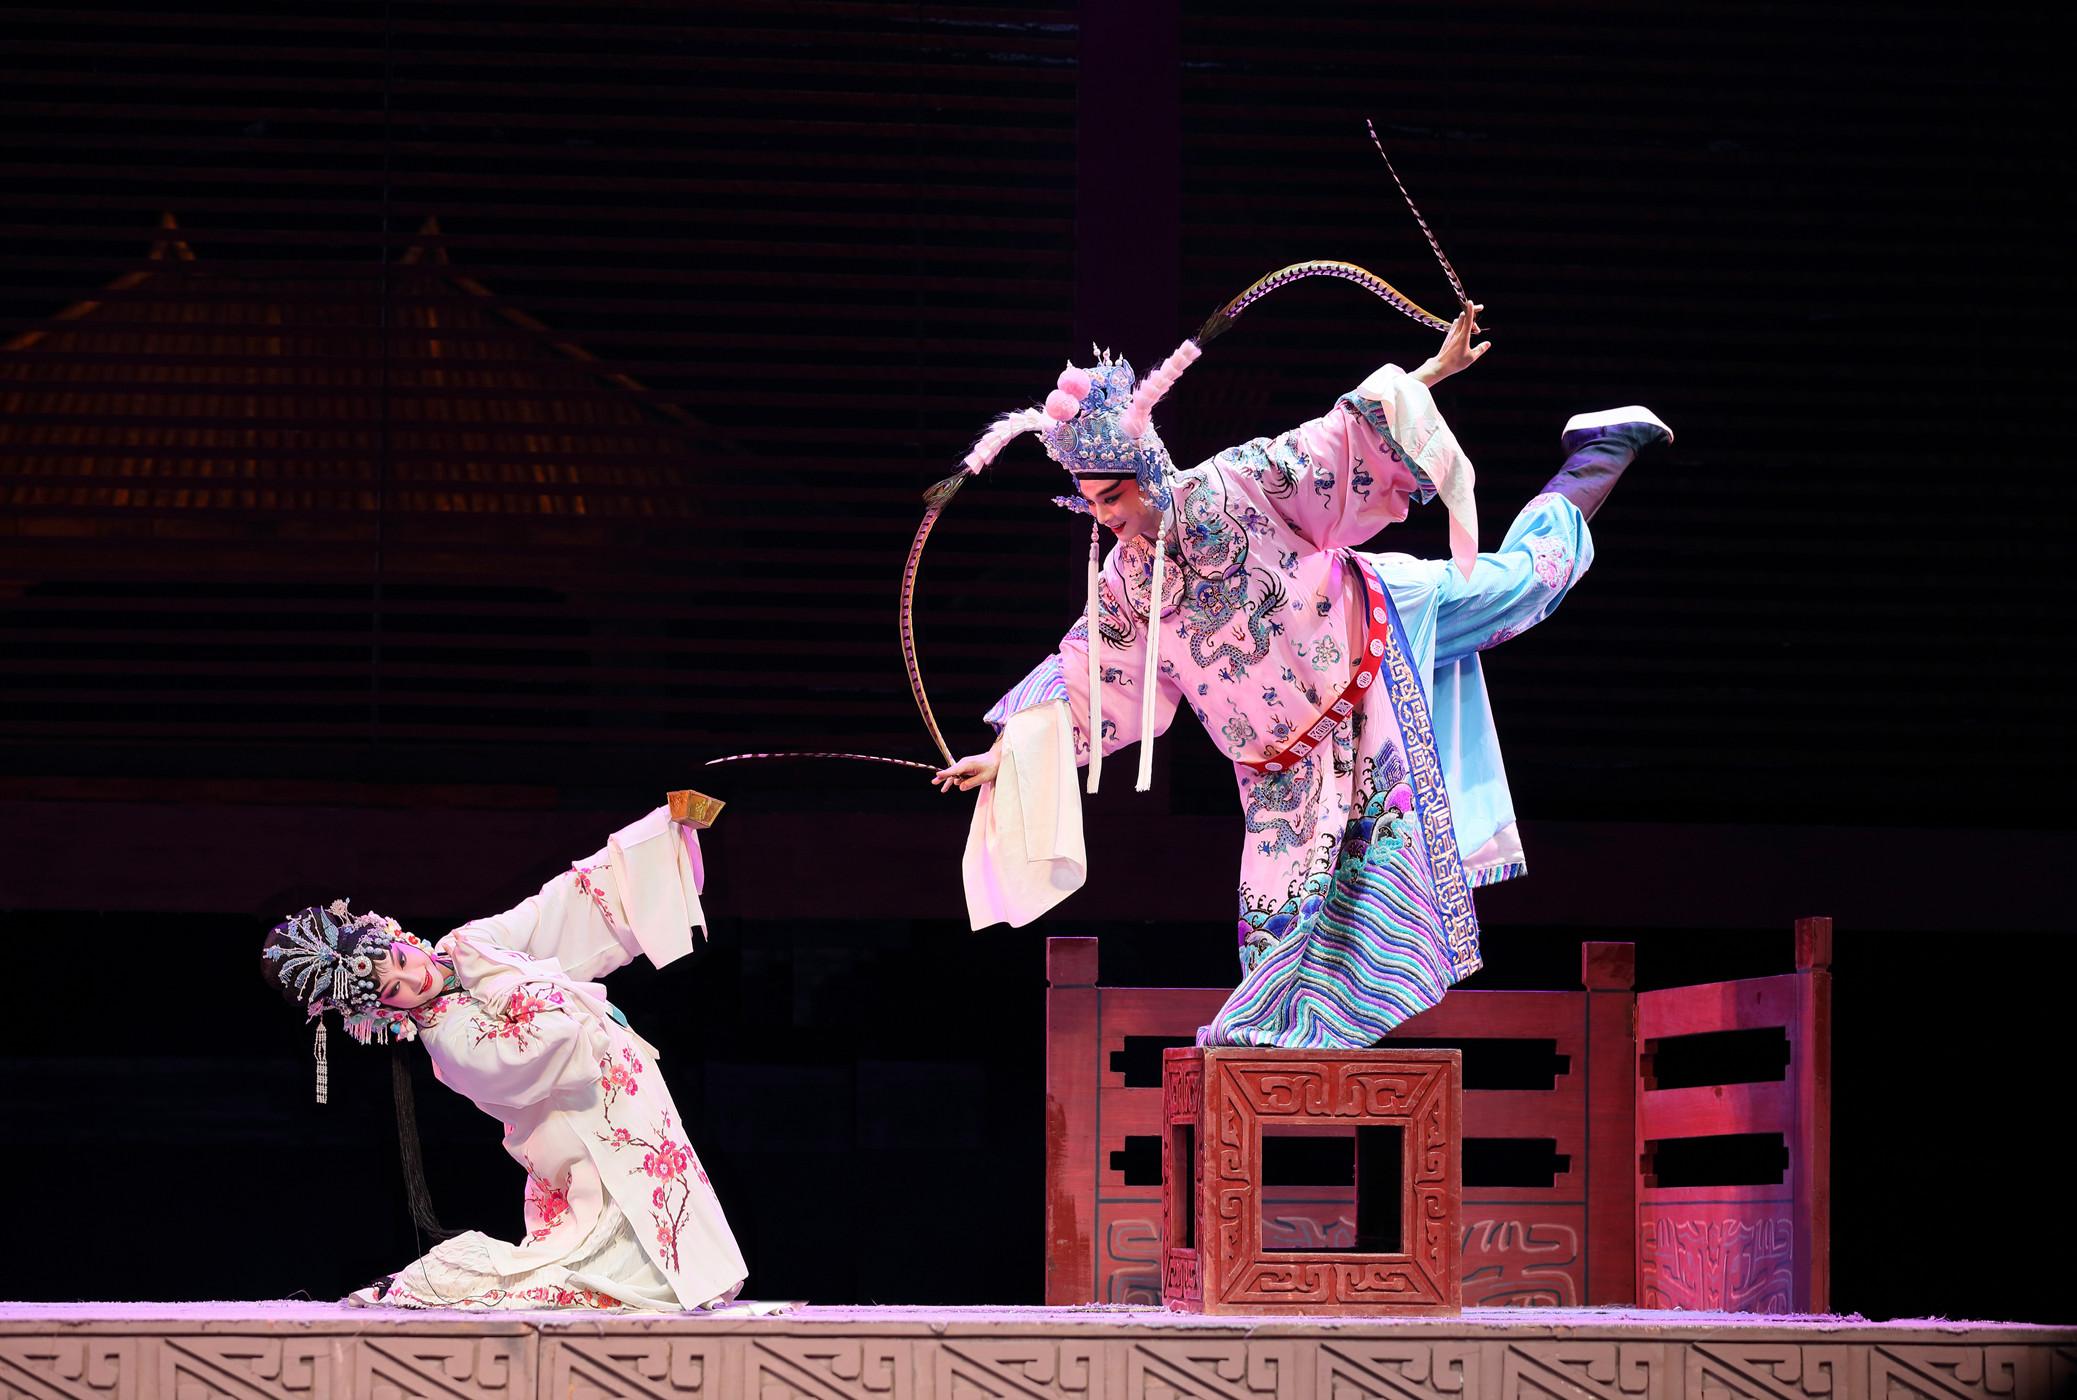 The Leisure and Cultural Services Department has invited the Zhejiang Wu Opera Research Centre to return to Hong Kong for three stunning performances in late July at this year's Chinese Opera Festival. Photo shows a scene from Excerpt "The Party ".